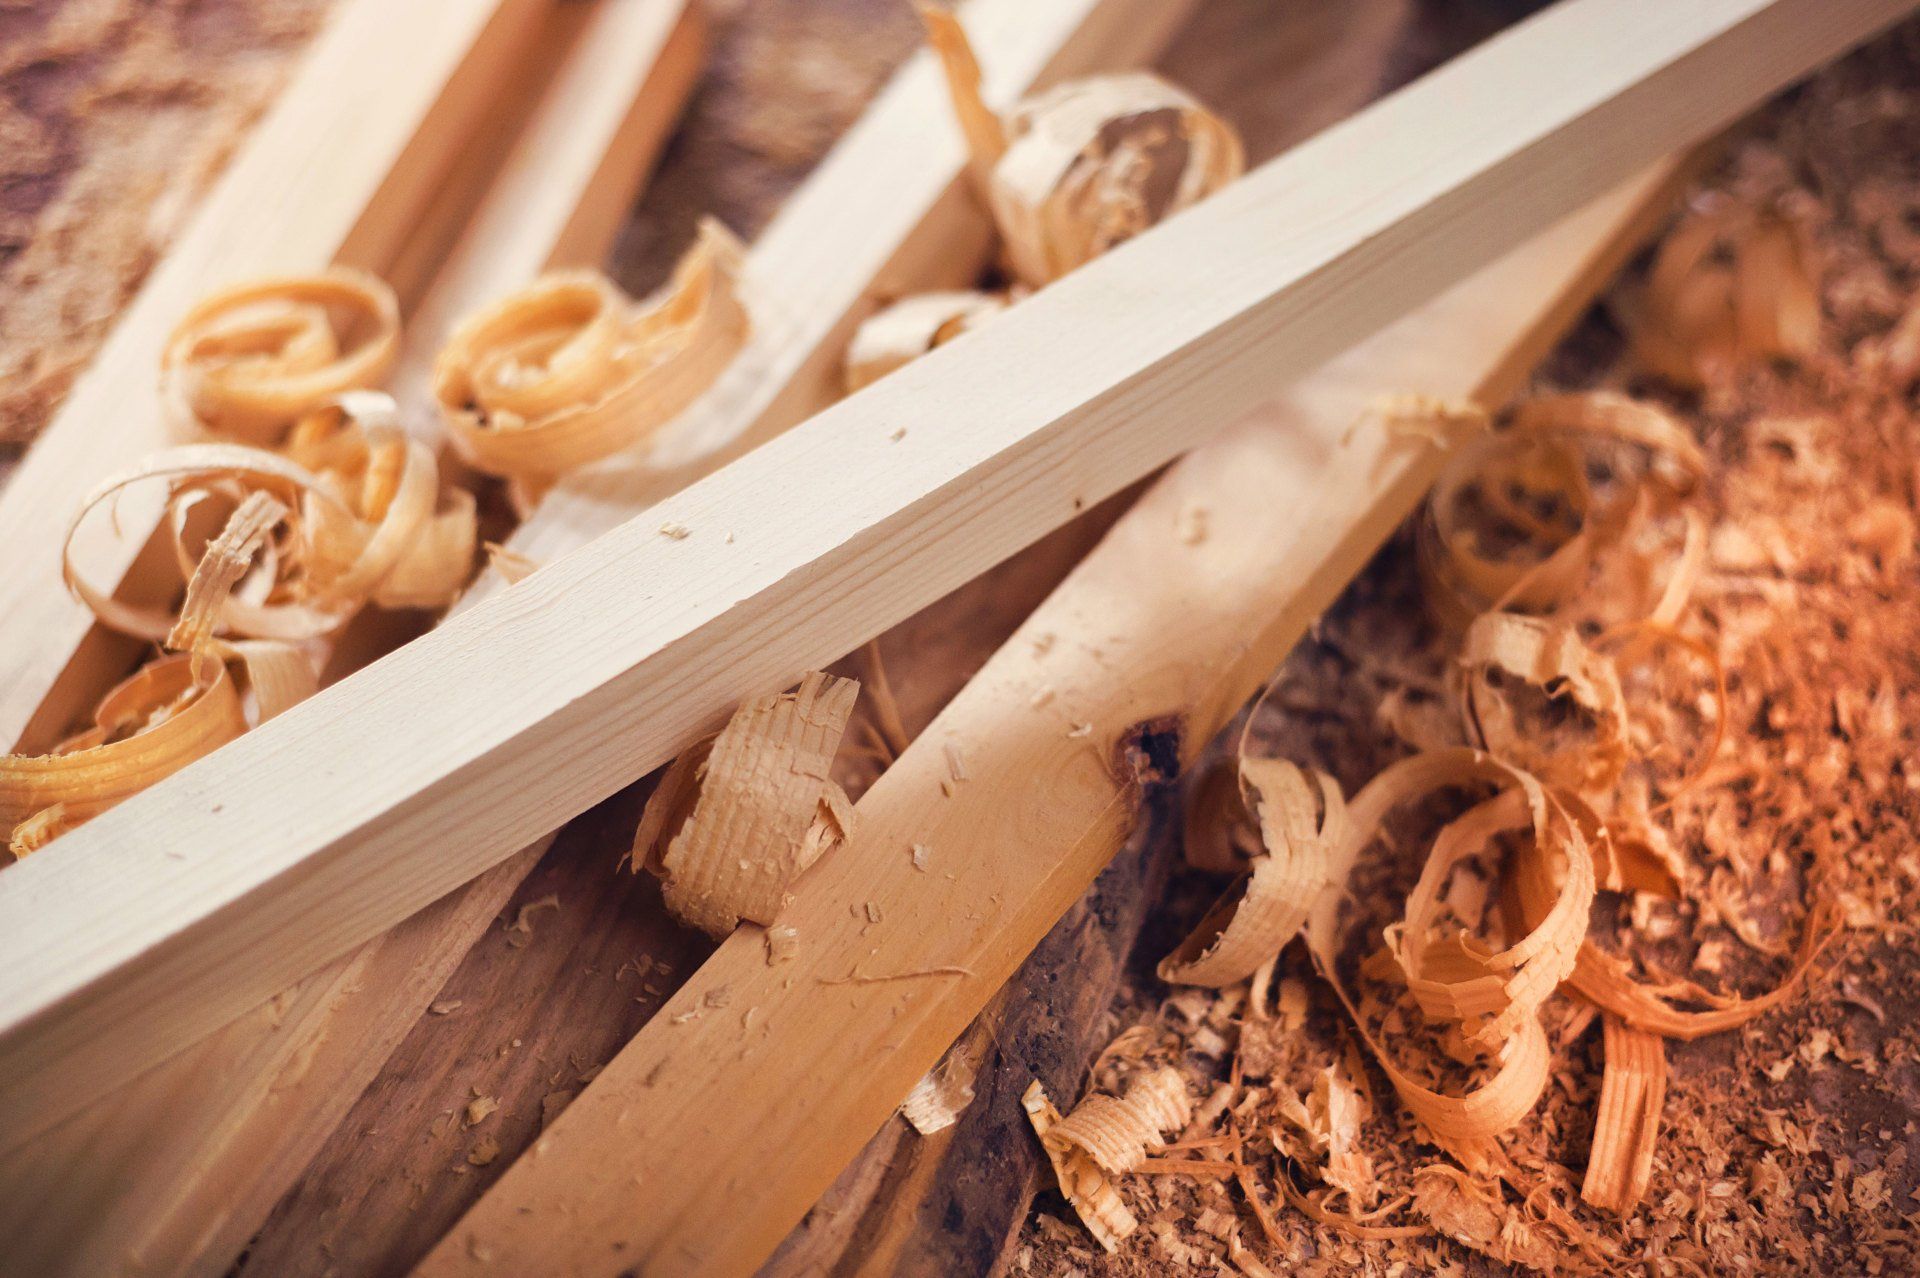 a pile of wood shavings and pieces of wood on a wooden table .